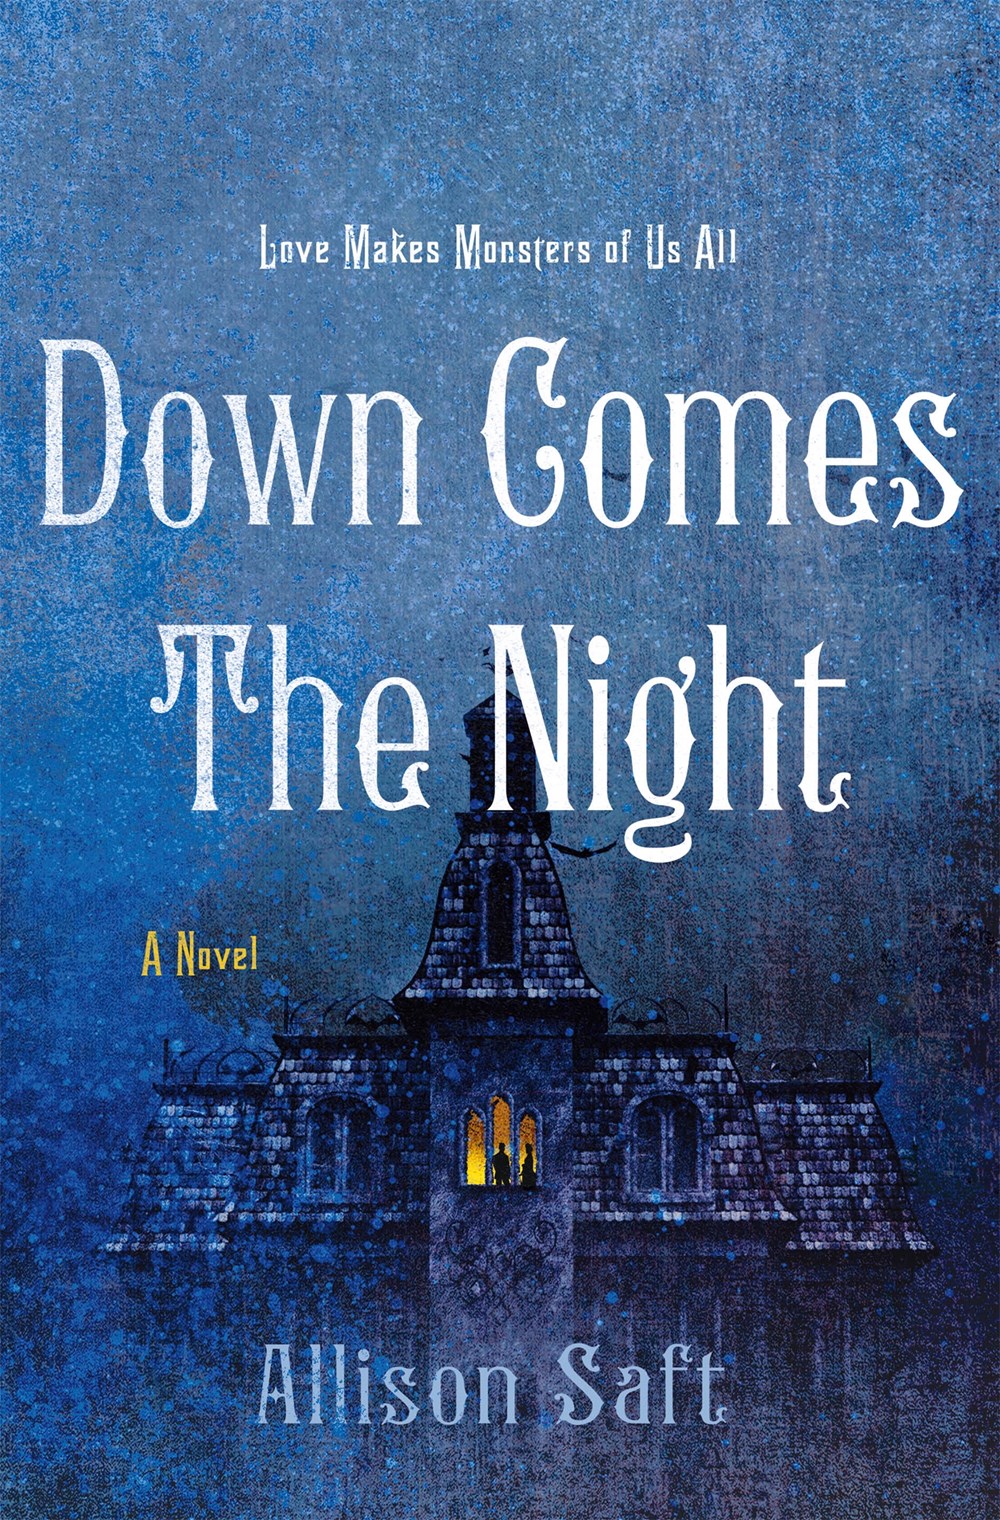 Down Comes the Night by Allison Saft